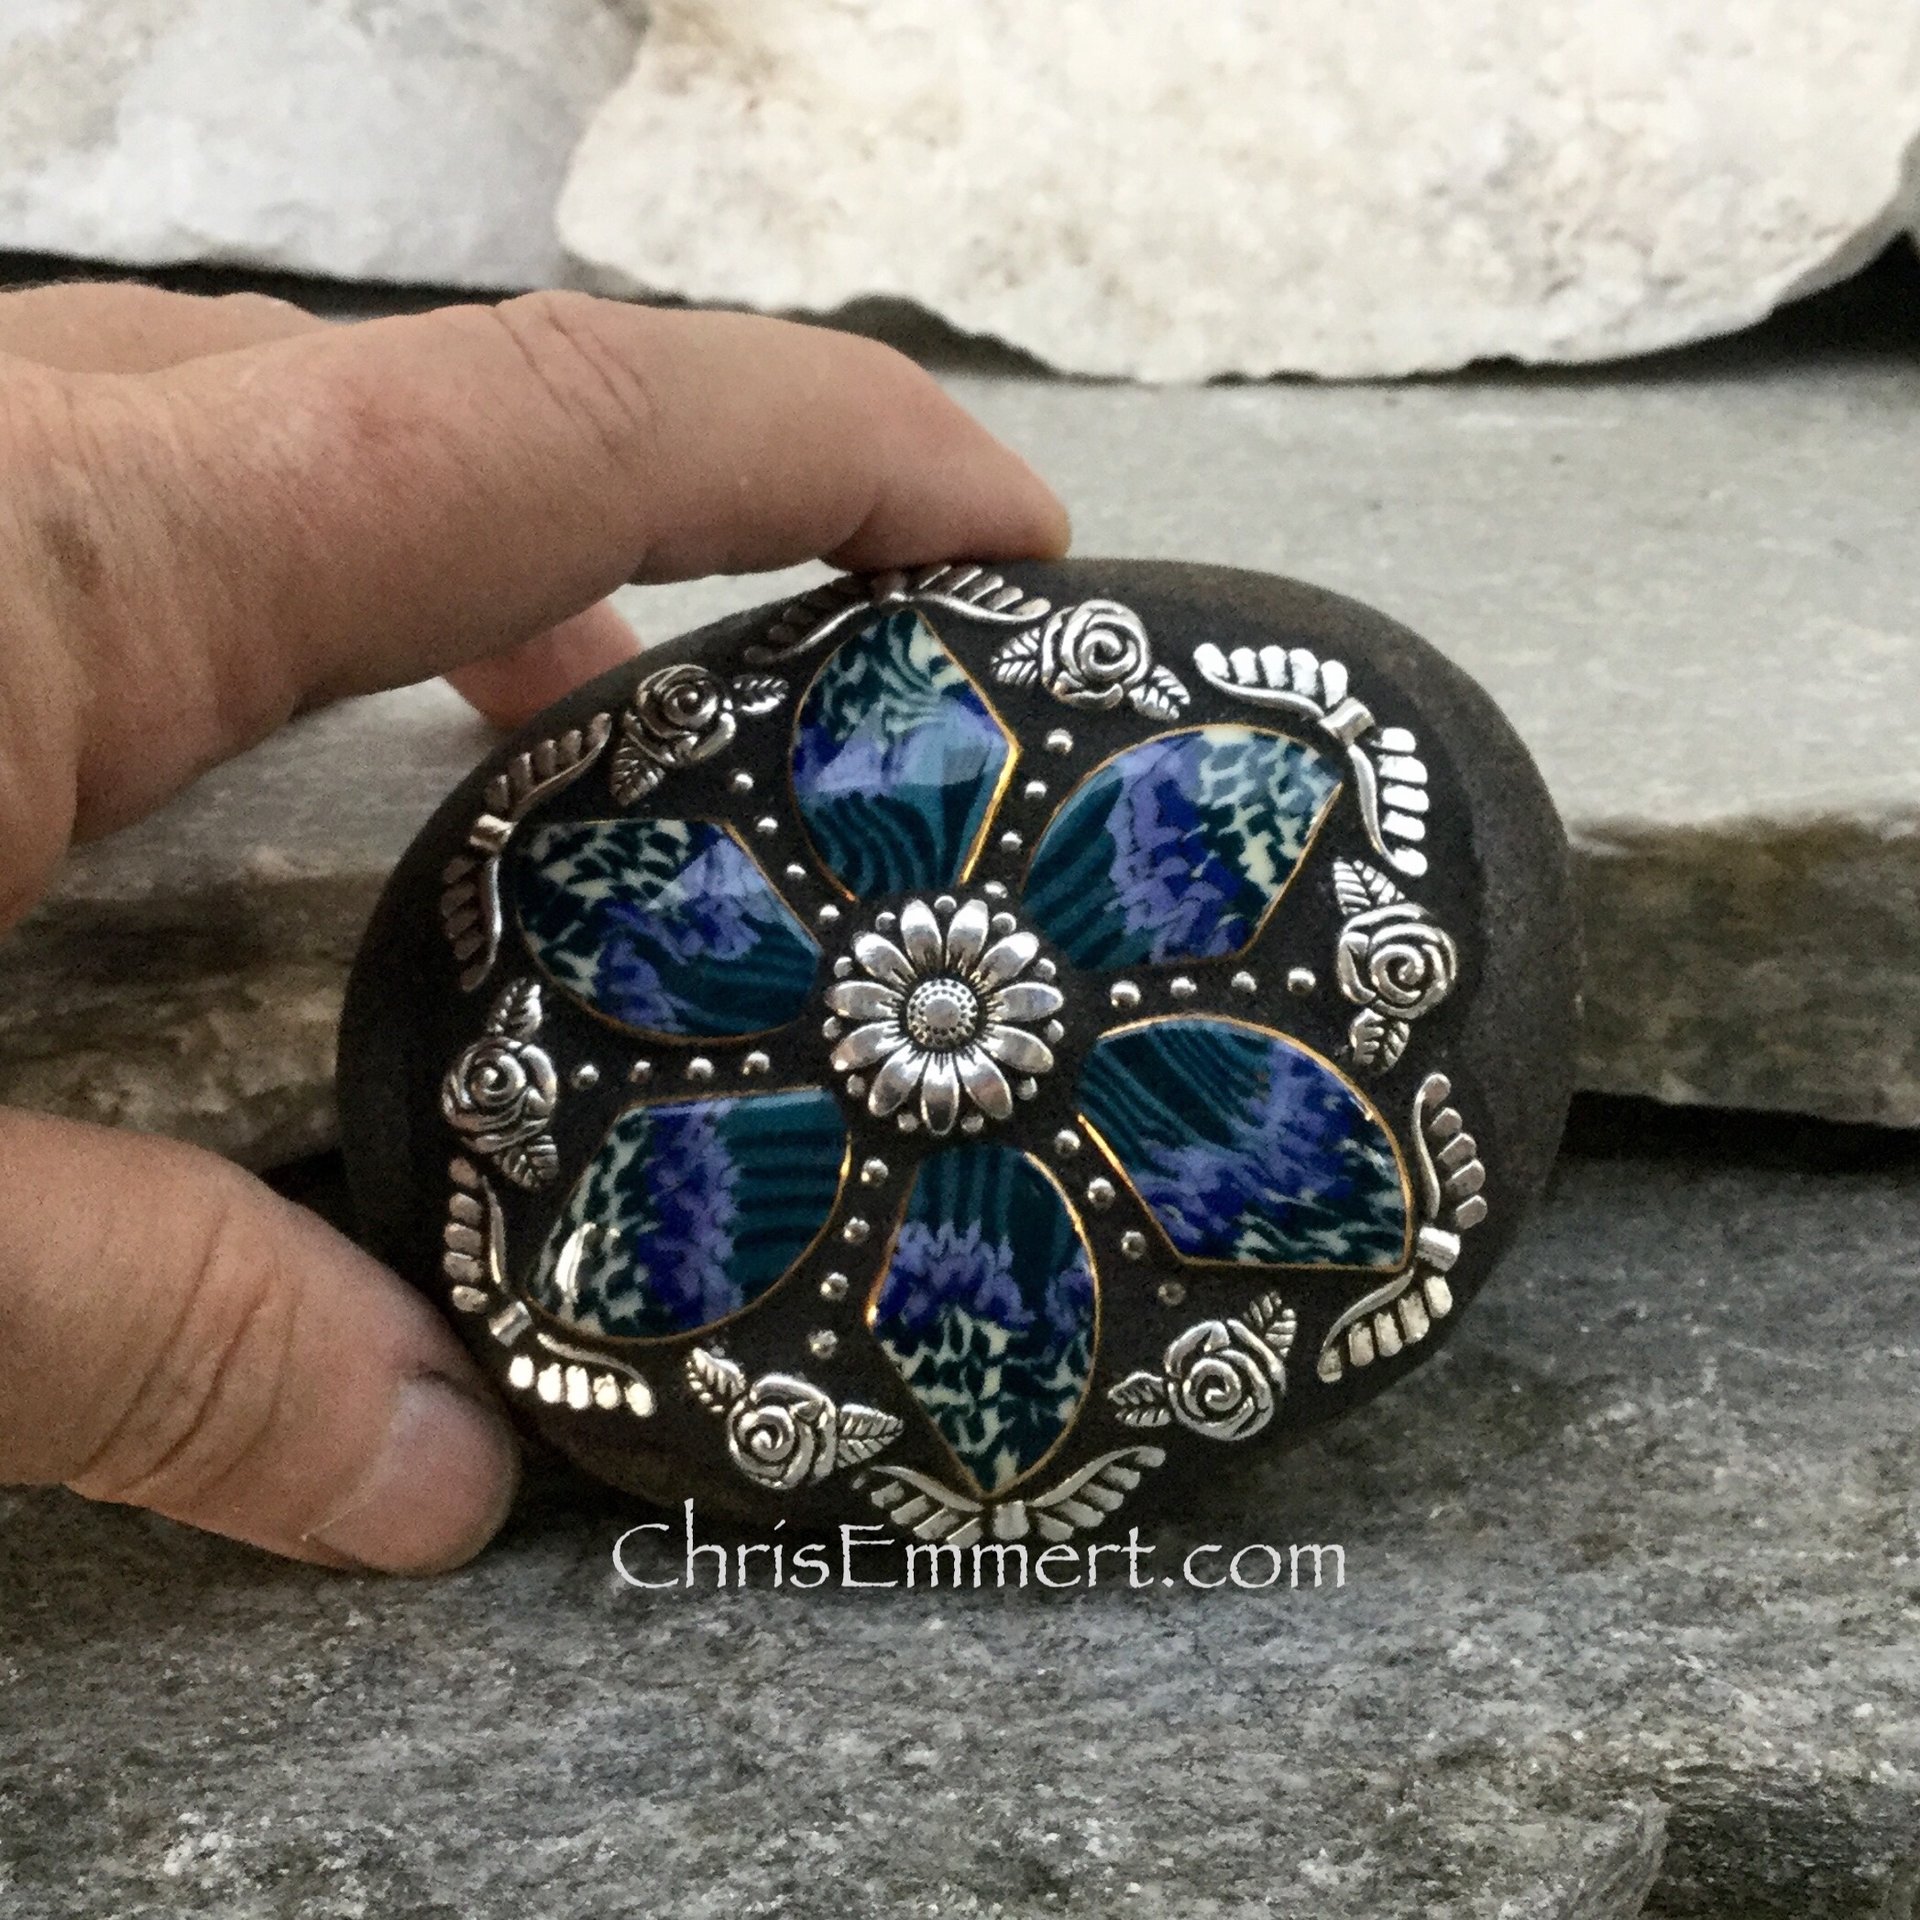 Teal 6 Petal Flower with Roses, Angel Wings, Mosaic Paperweight / Garden Stone